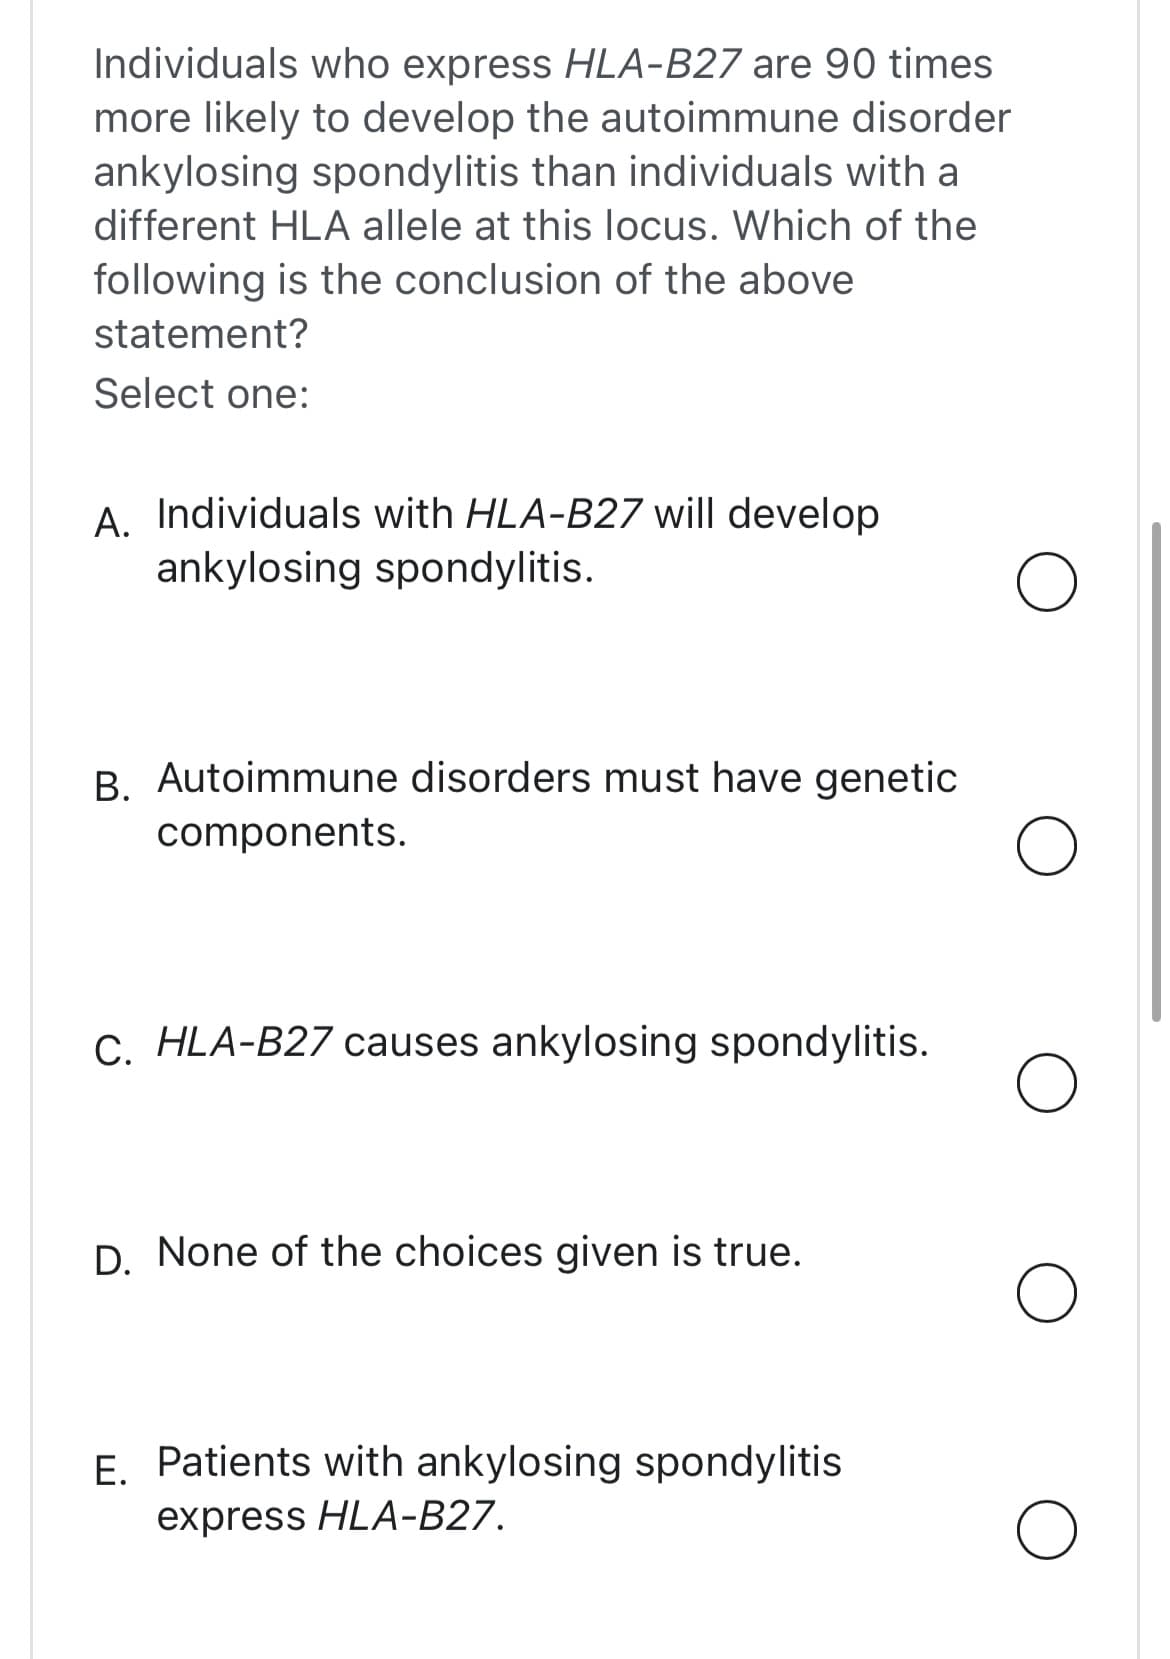 Individuals who express HLA-B27 are 90 times
more likely to develop the autoimmune disorder
ankylosing spondylitis than individuals with a
different HLA allele at this locus. Which of the
following is the conclusion of the above
statement?
Select one:
A. Individuals with HLA-B27 will develop
ankylosing spondylitis.
B. Autoimmune disorders must have genetic
components.
C. HLA-B27 causes ankylosing spondylitis.
D. None of the choices given is true.
E.
Patients with ankylosing spondylitis
express HLA-B27.
O
O
O